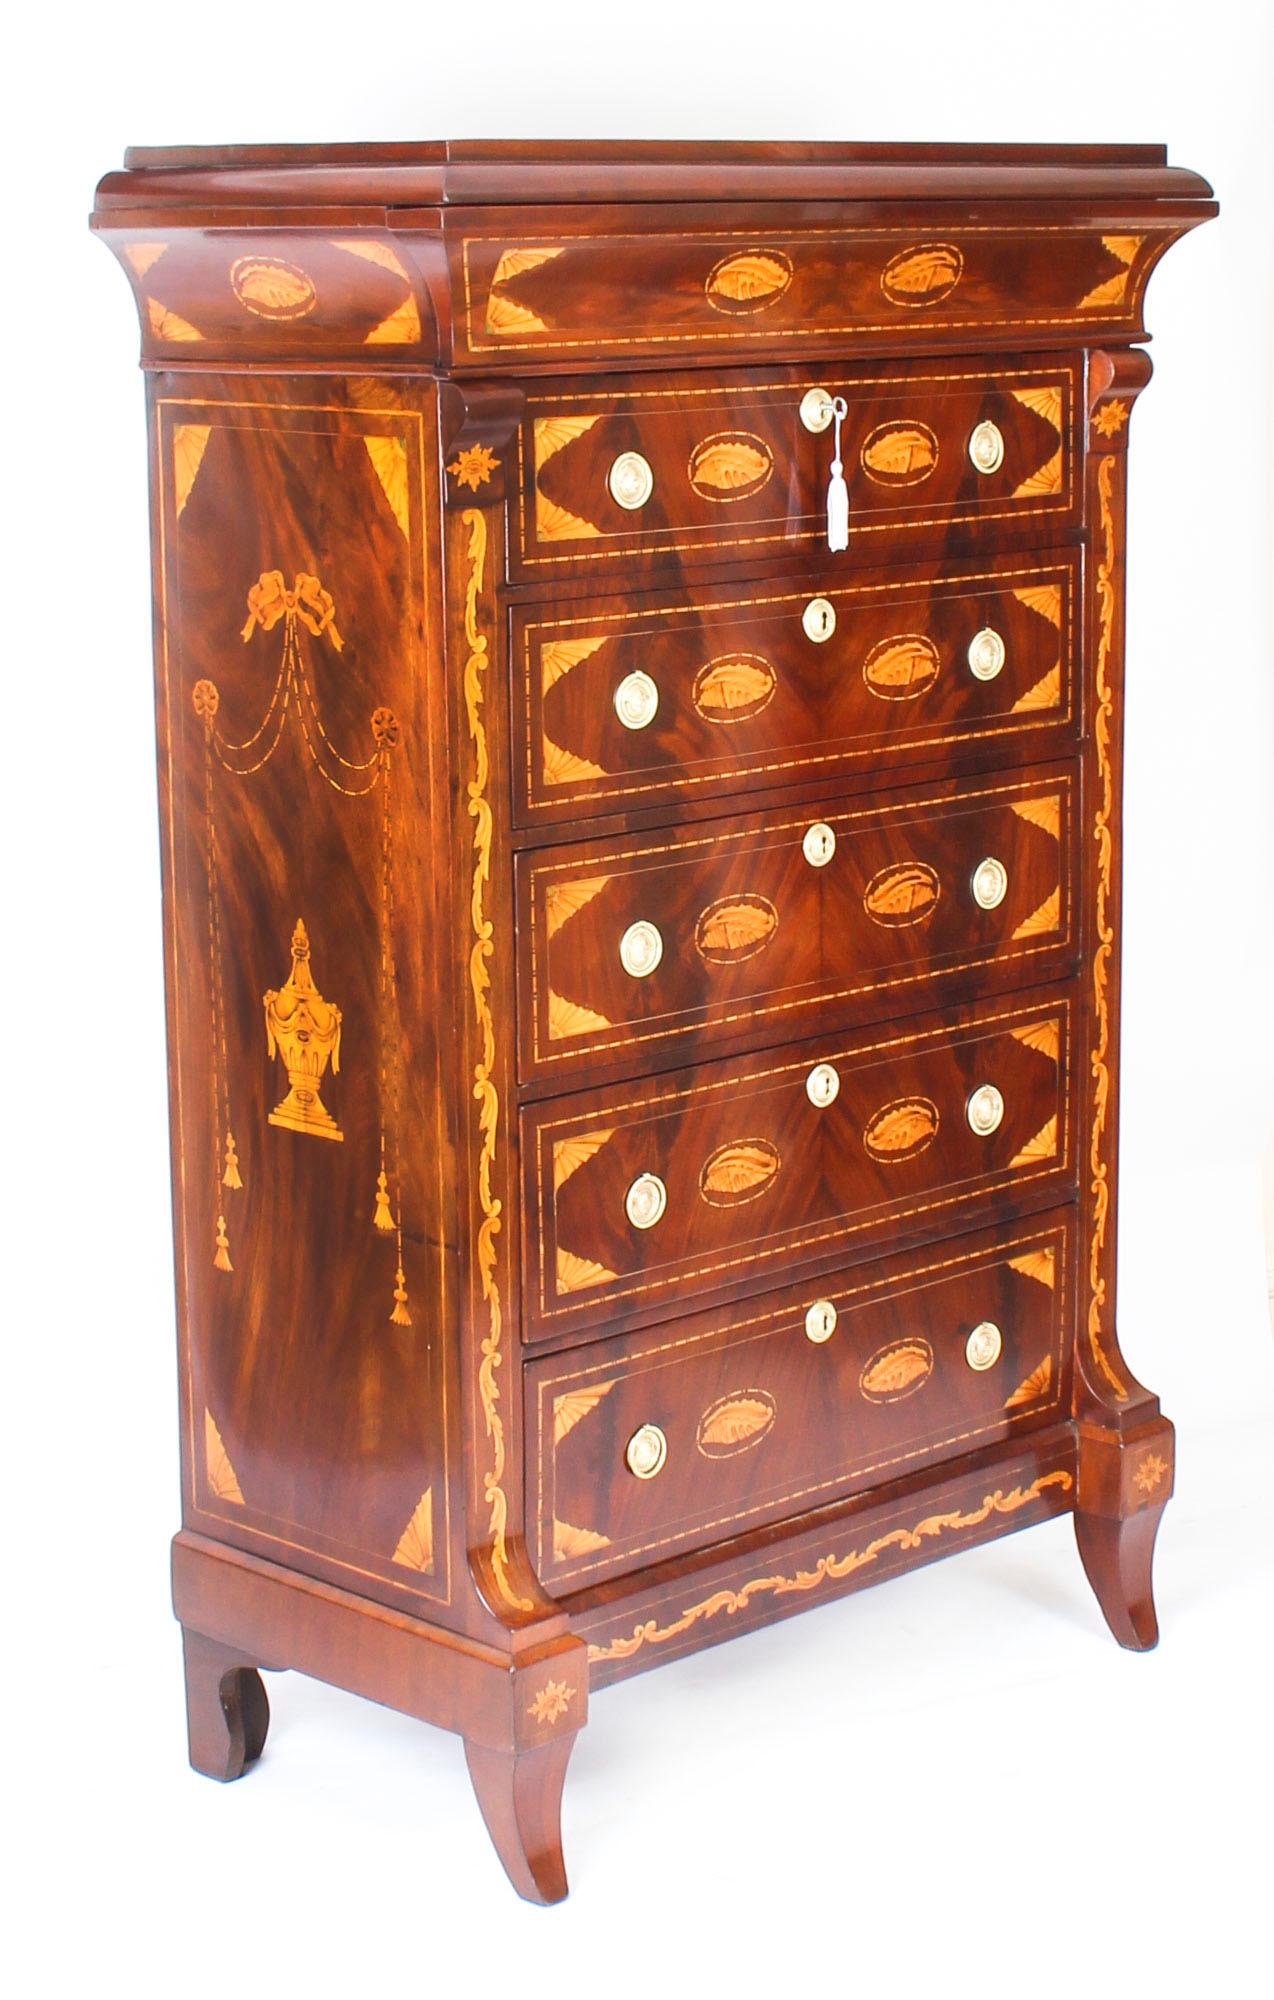 Antique Dutch Marquetry Walnut Seven Drawer Chest, Early 19th Century For Sale 7